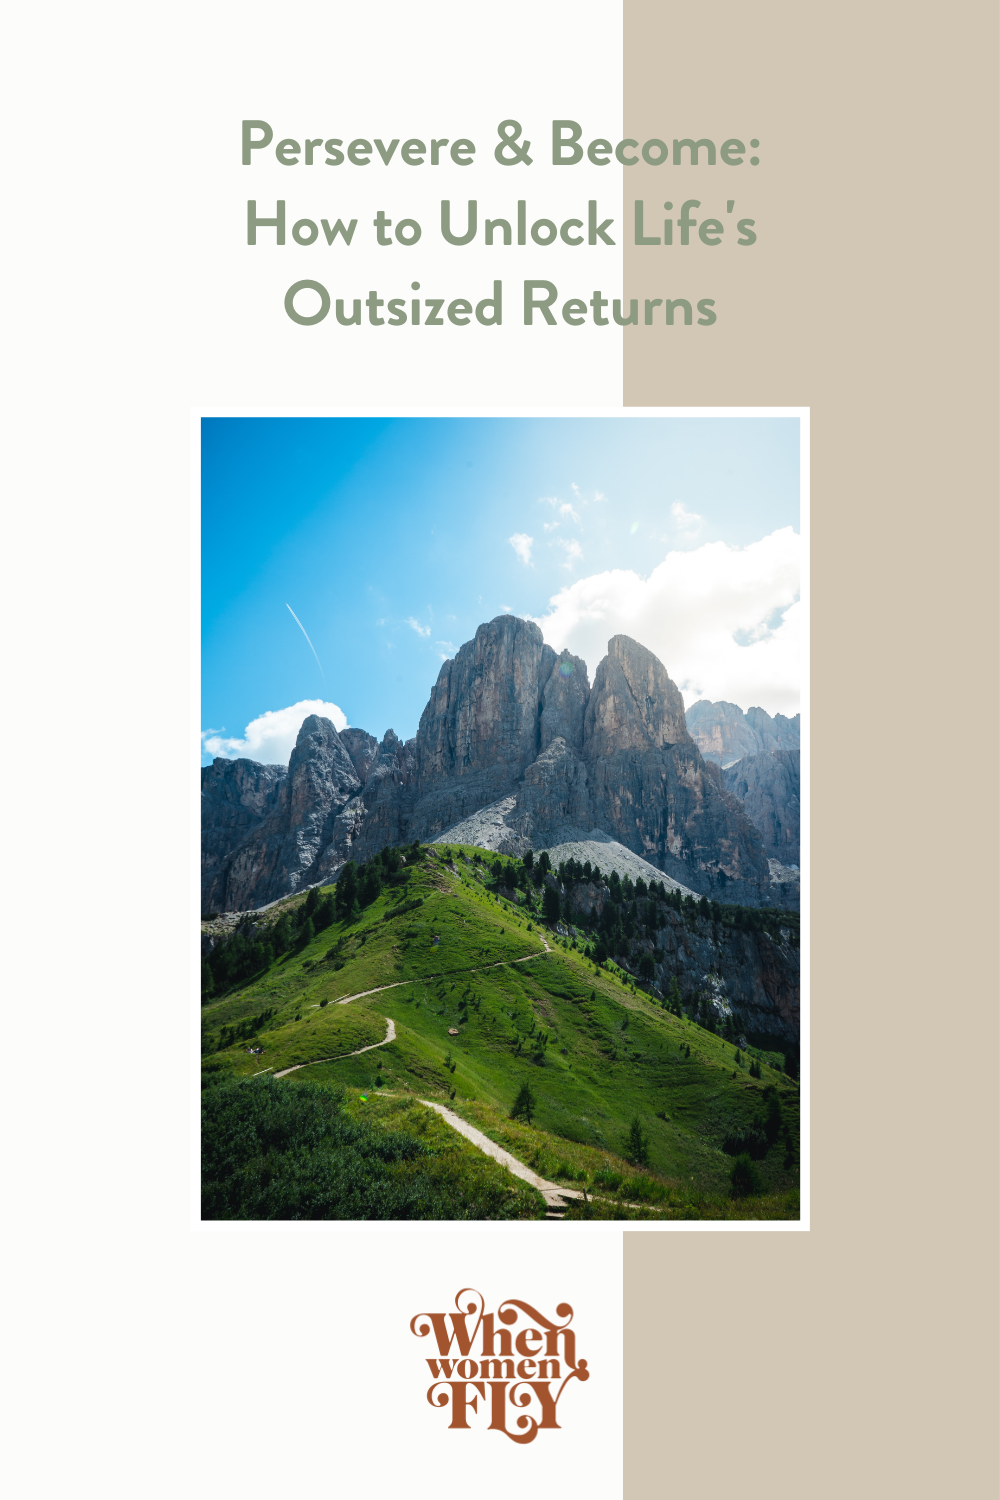 Persevere and Become: How to Unlock Life's Outsized Returns